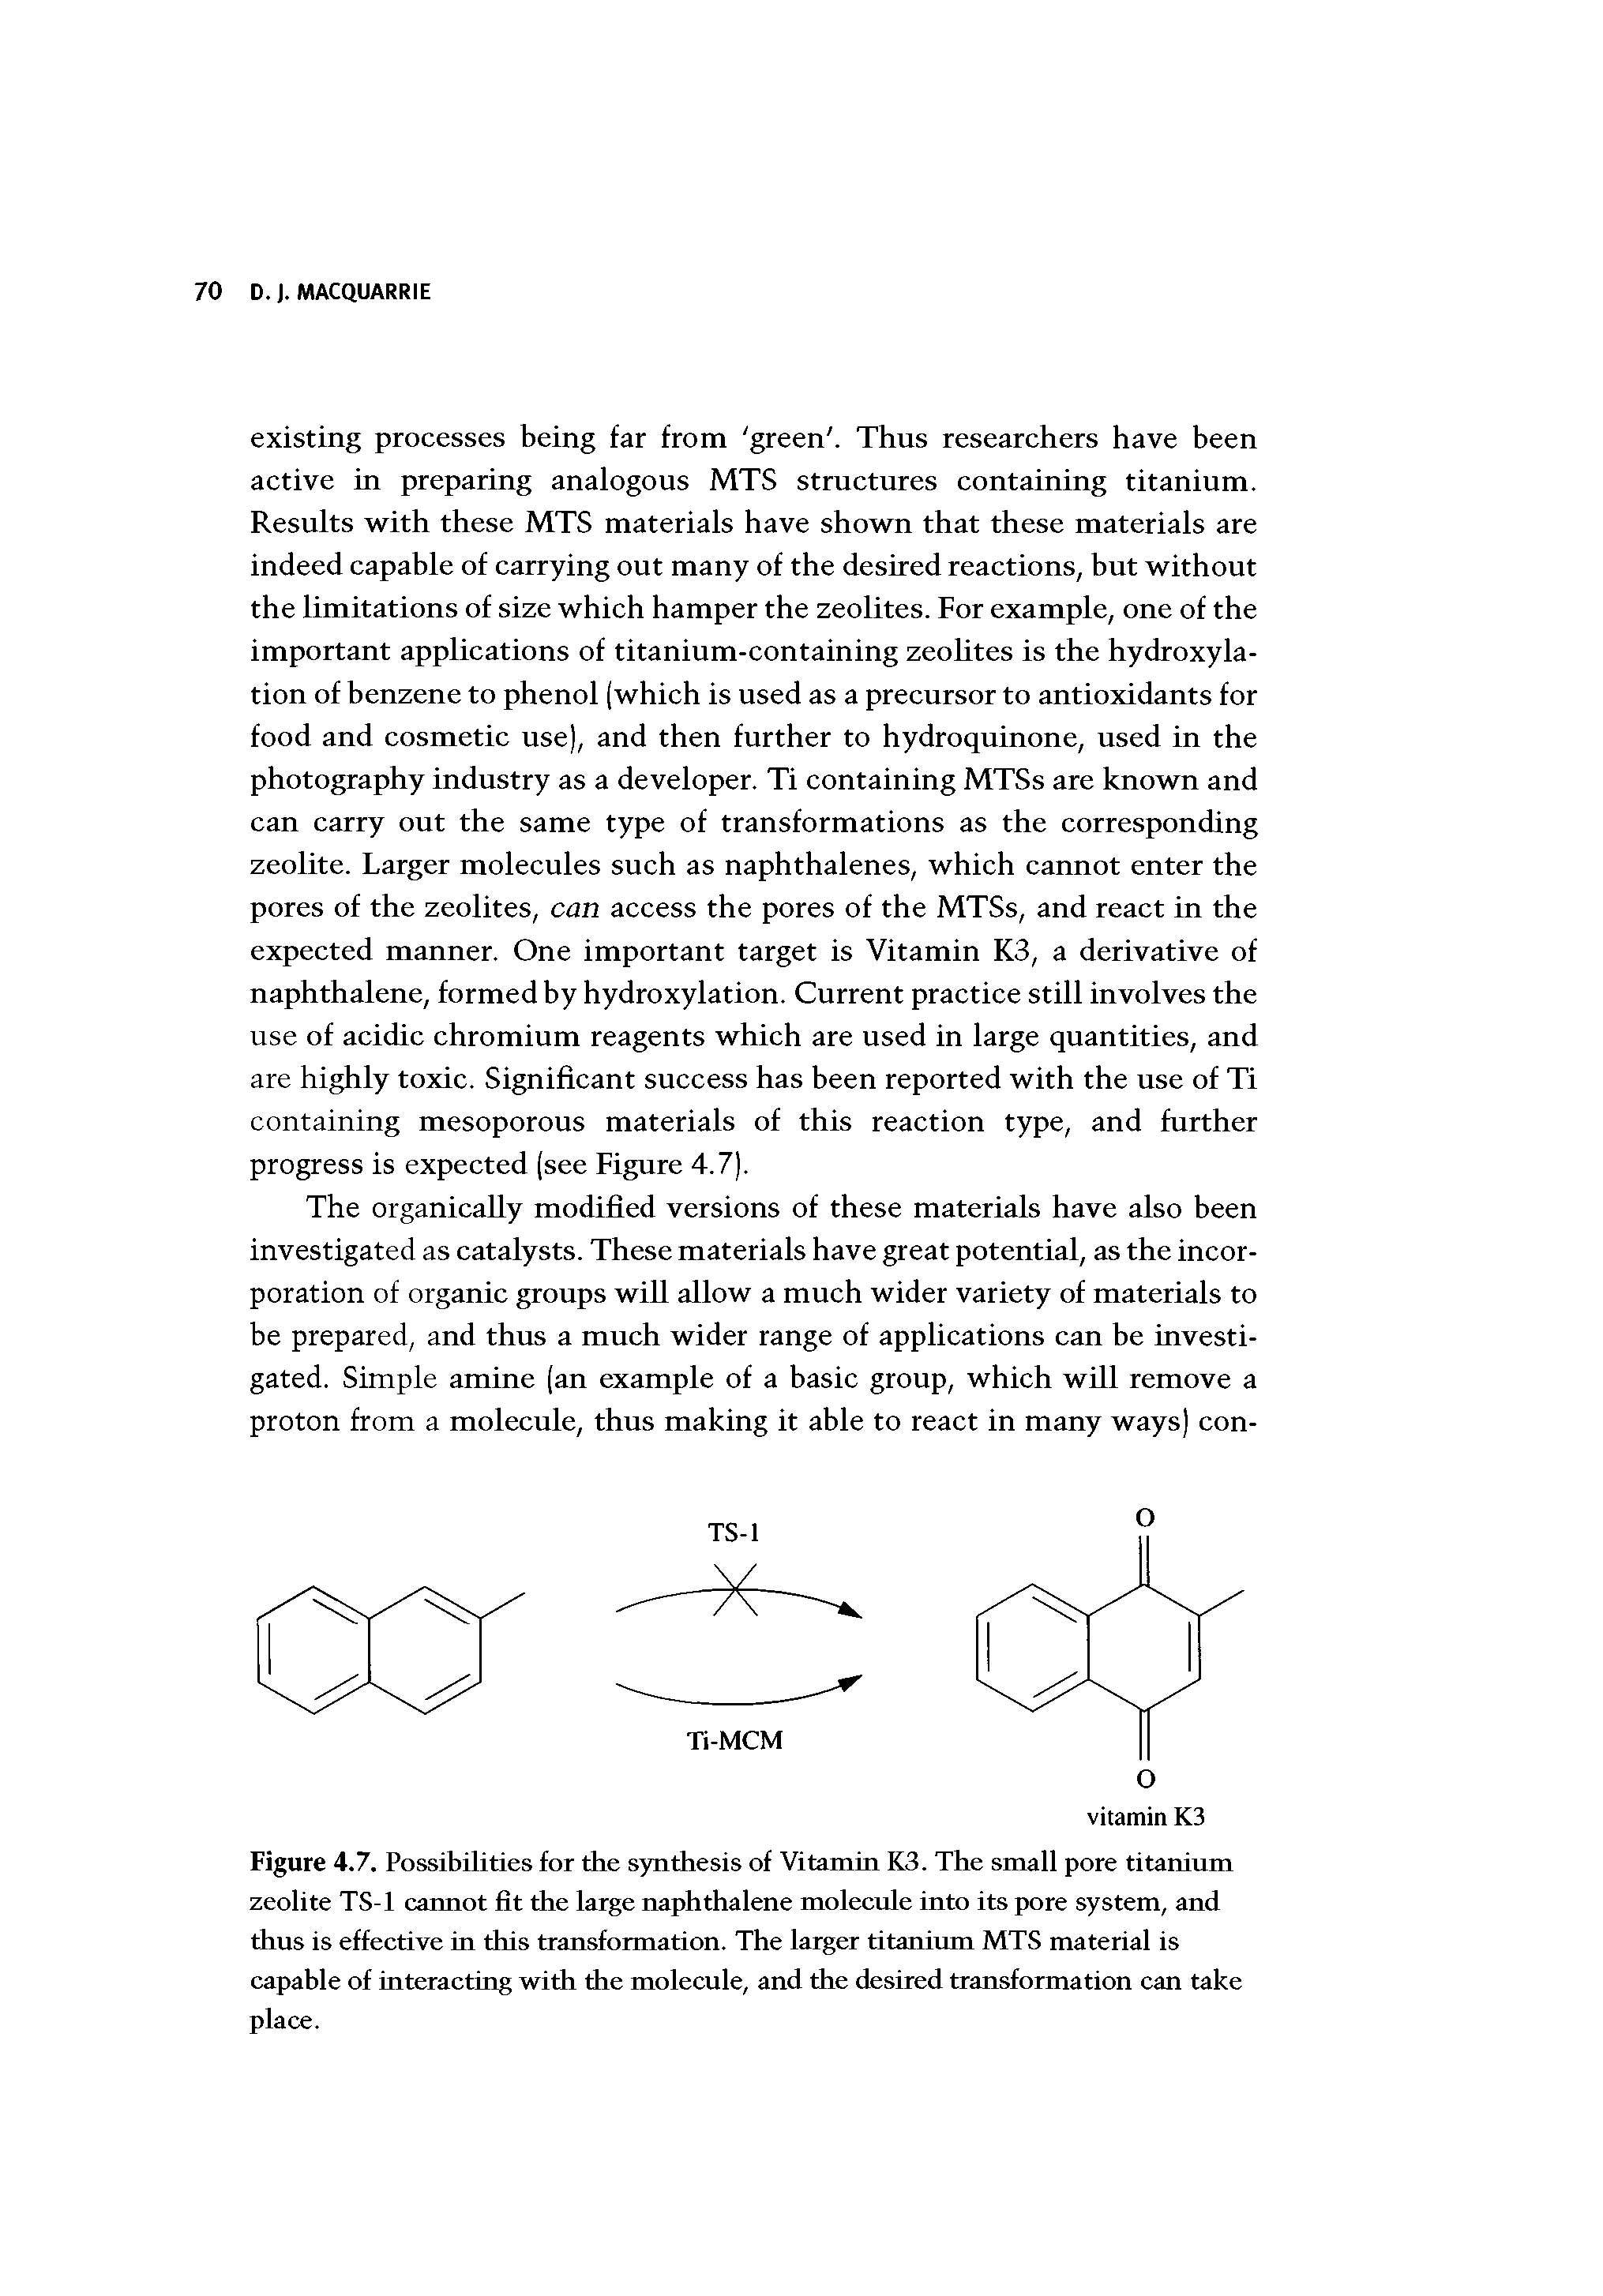 Figure 4.7. Possibilities for the synthesis of Vitamin K3. The small pore titaninm zeolite TS-1 cannot fit the large naphthalene molecule into its pore system, and thus is effective in this transformation. The larger titanium MTS material is capable of interacting with the molecule, and the desired transformation can take place.